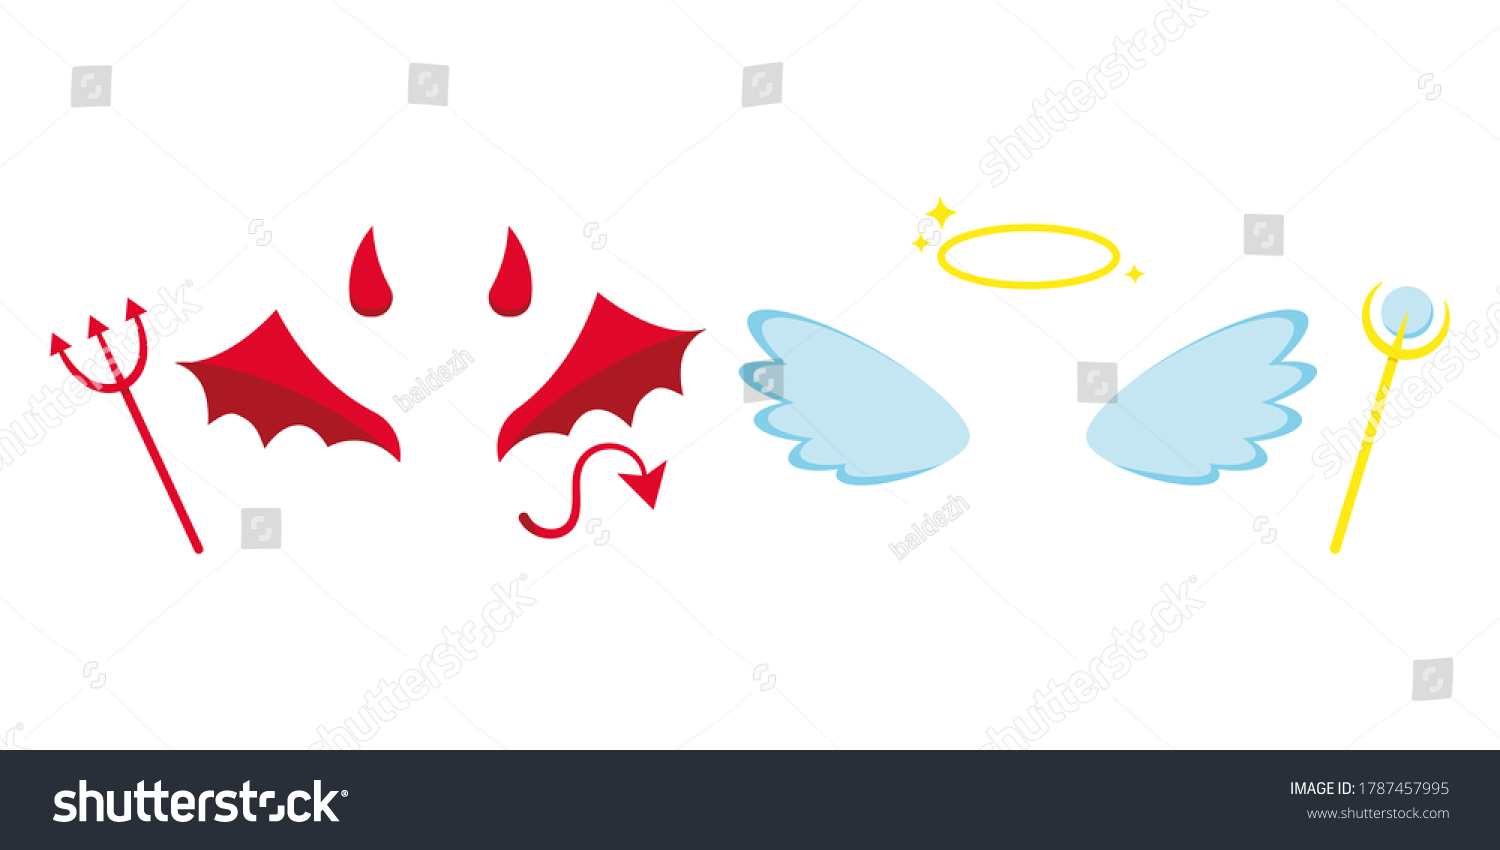 SVG of Angel and devil or demon costume attributes icon set isolated on white background - horns, light angel red evil wings, tail, halo, staff, trident sign. Flat design cartoon suit vector illustration. svg